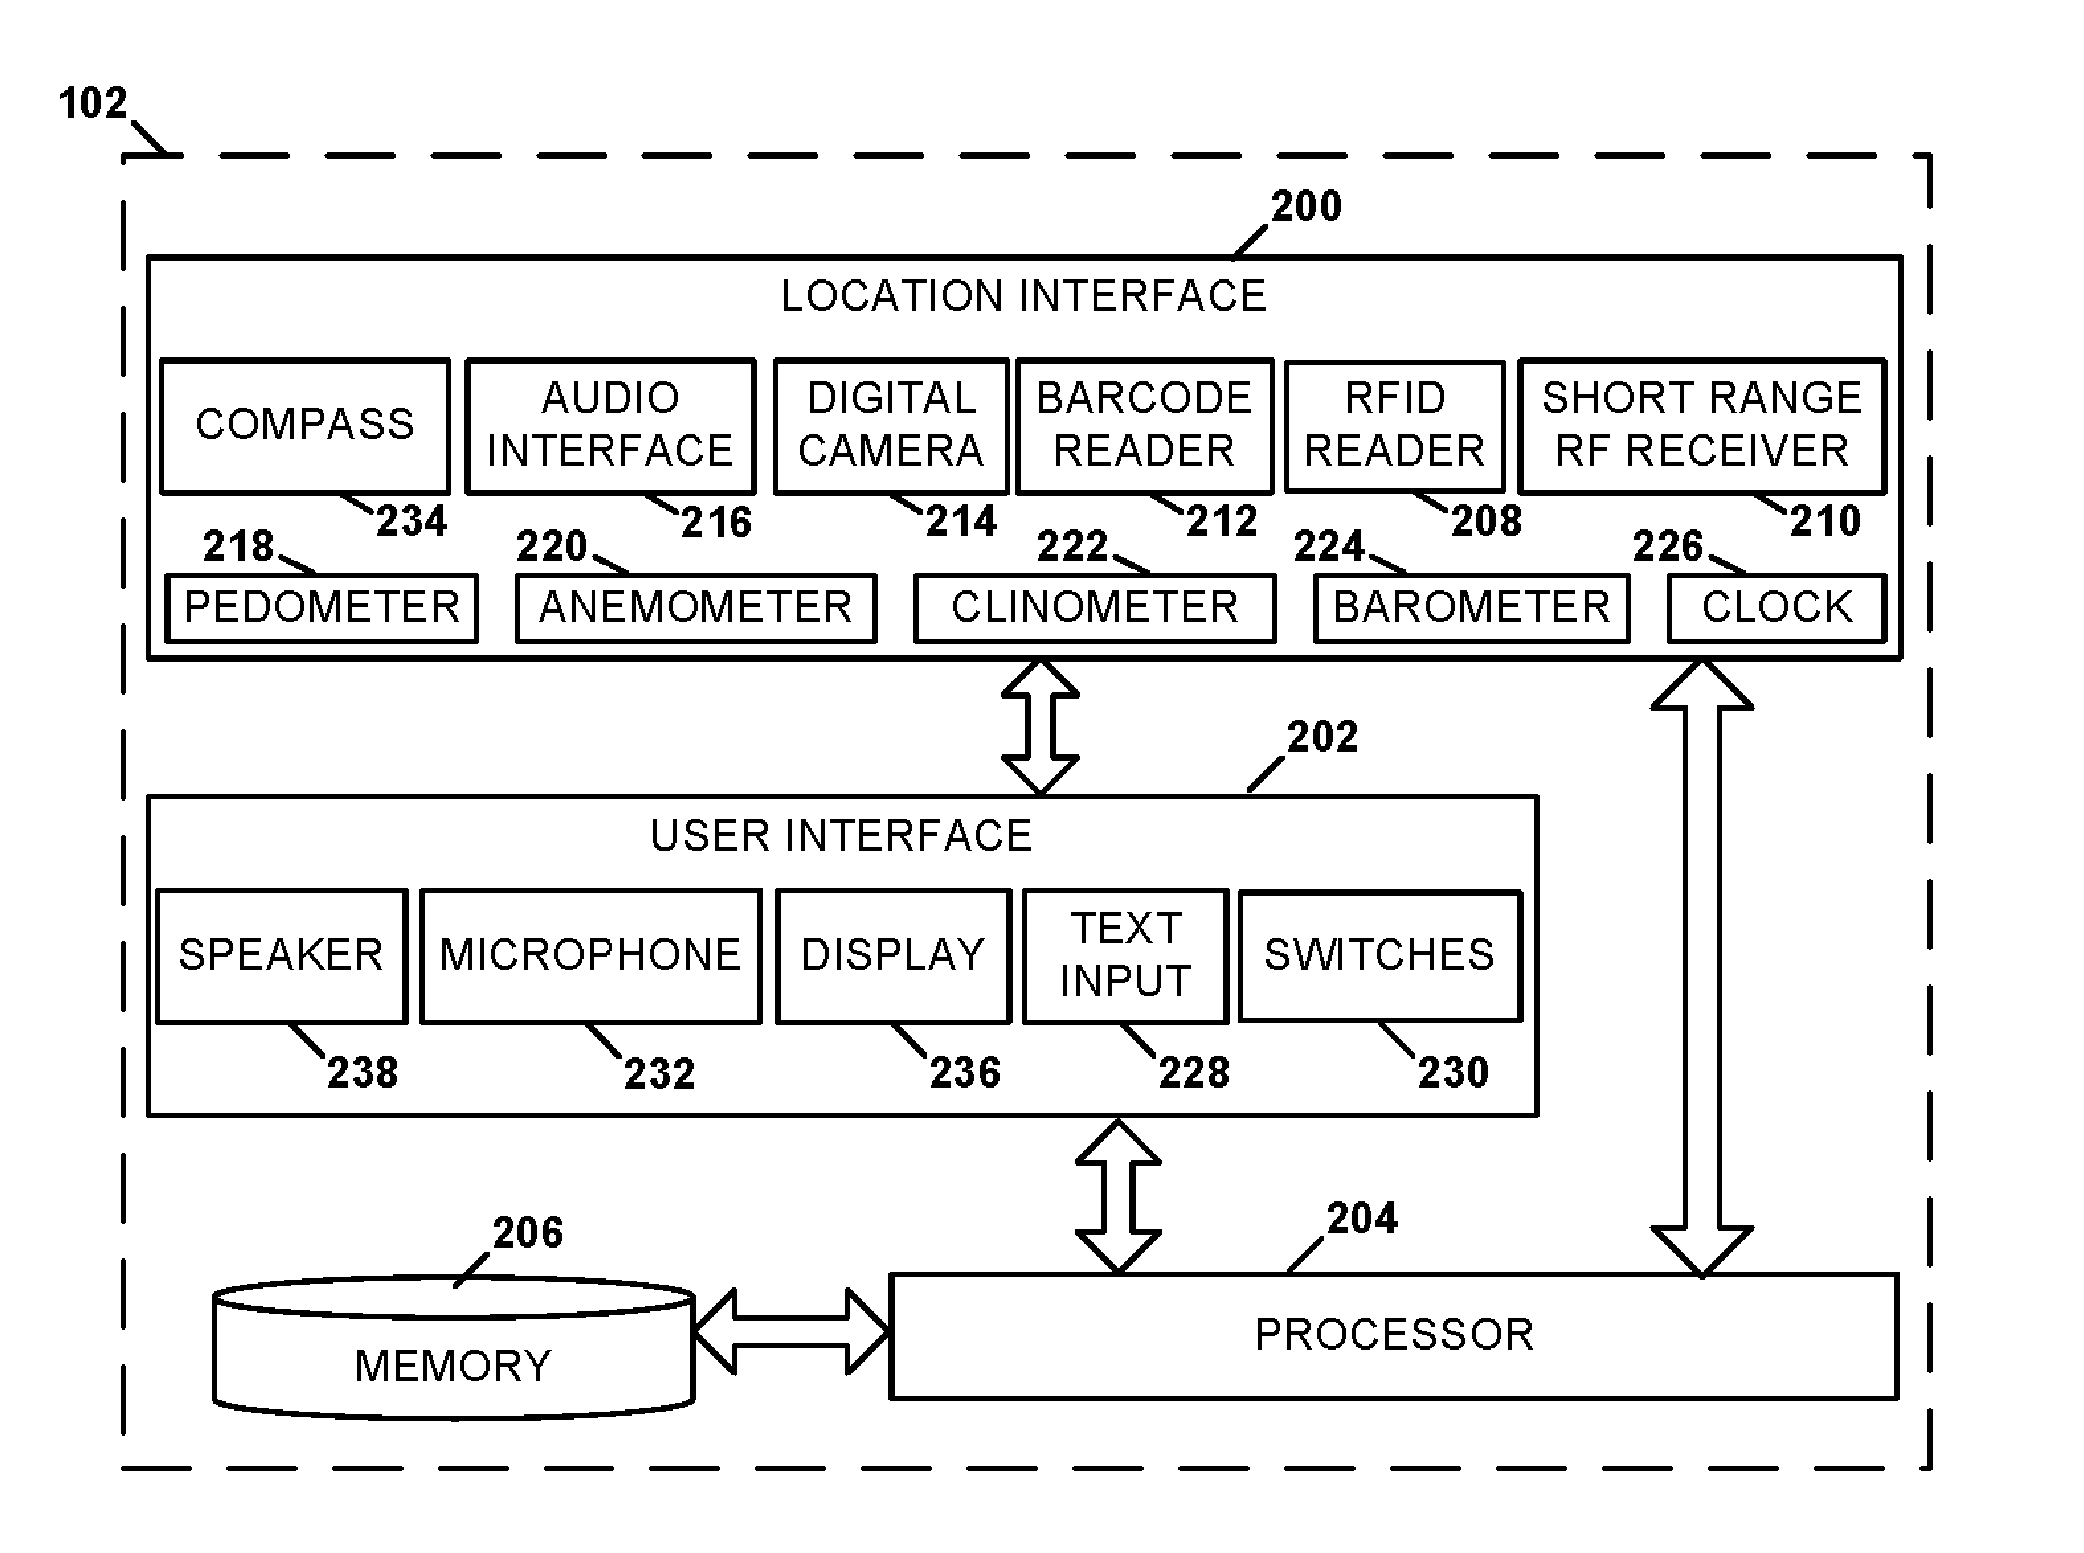 Methods, systems, and computer program products for indicating a return route in a mobile device